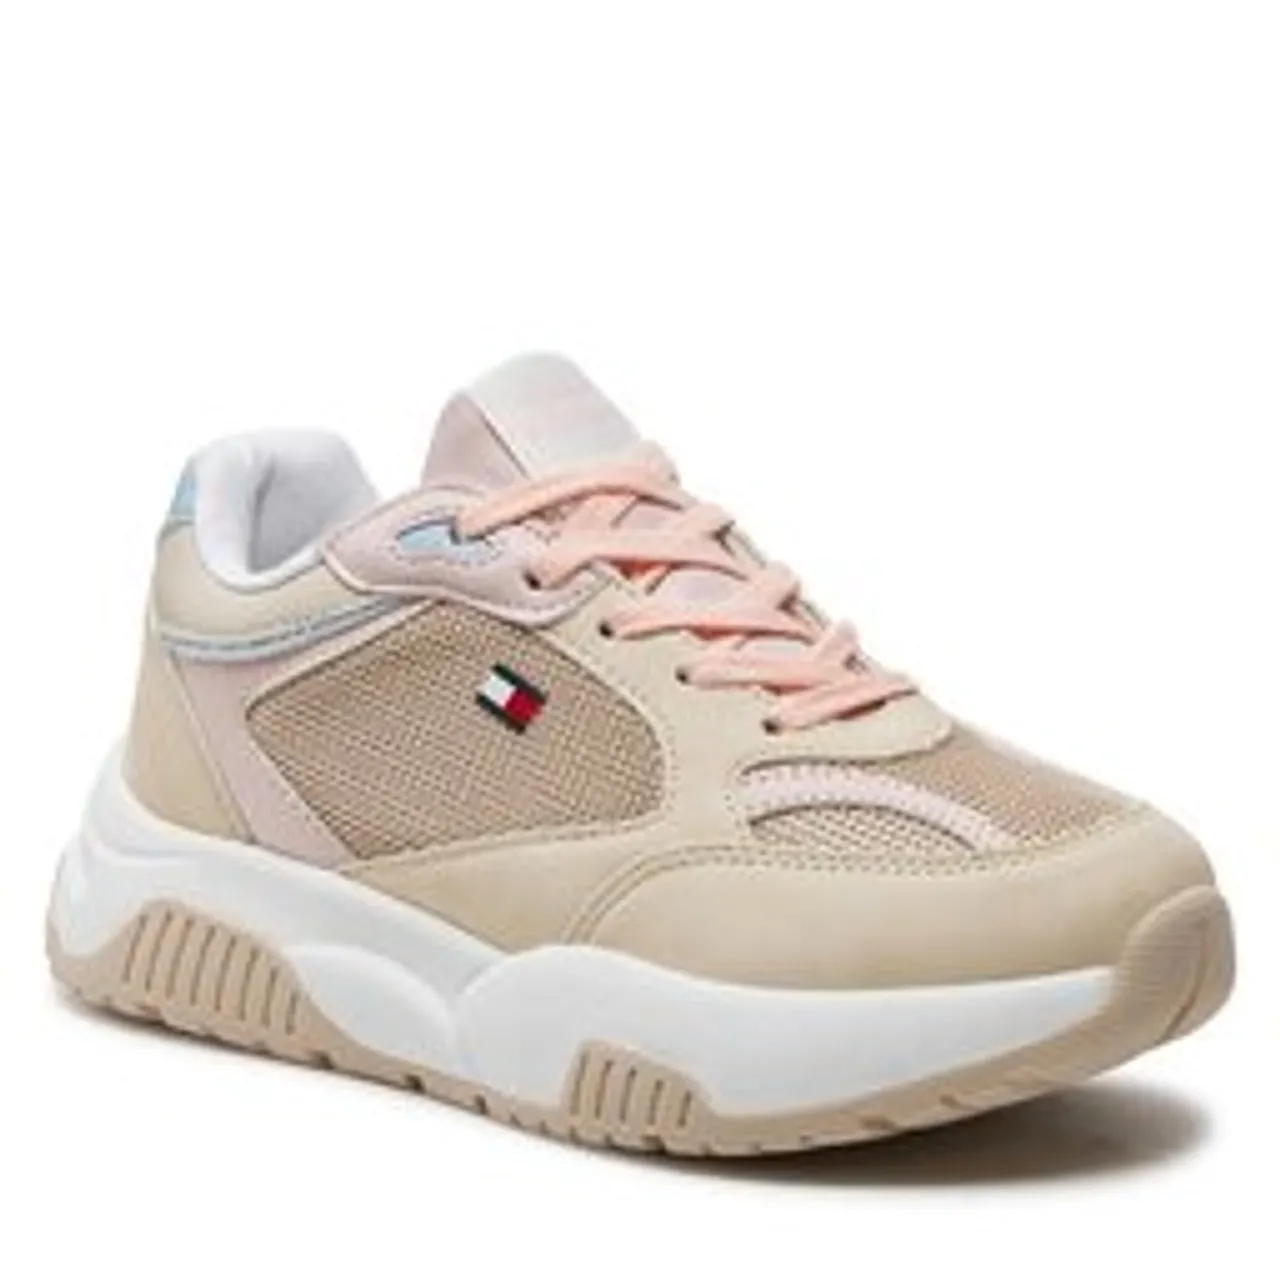 Sneakers Tommy Hilfiger Low Cut Lace-Up Sneaker T3A9-33218-1696 Beige/Pink A575